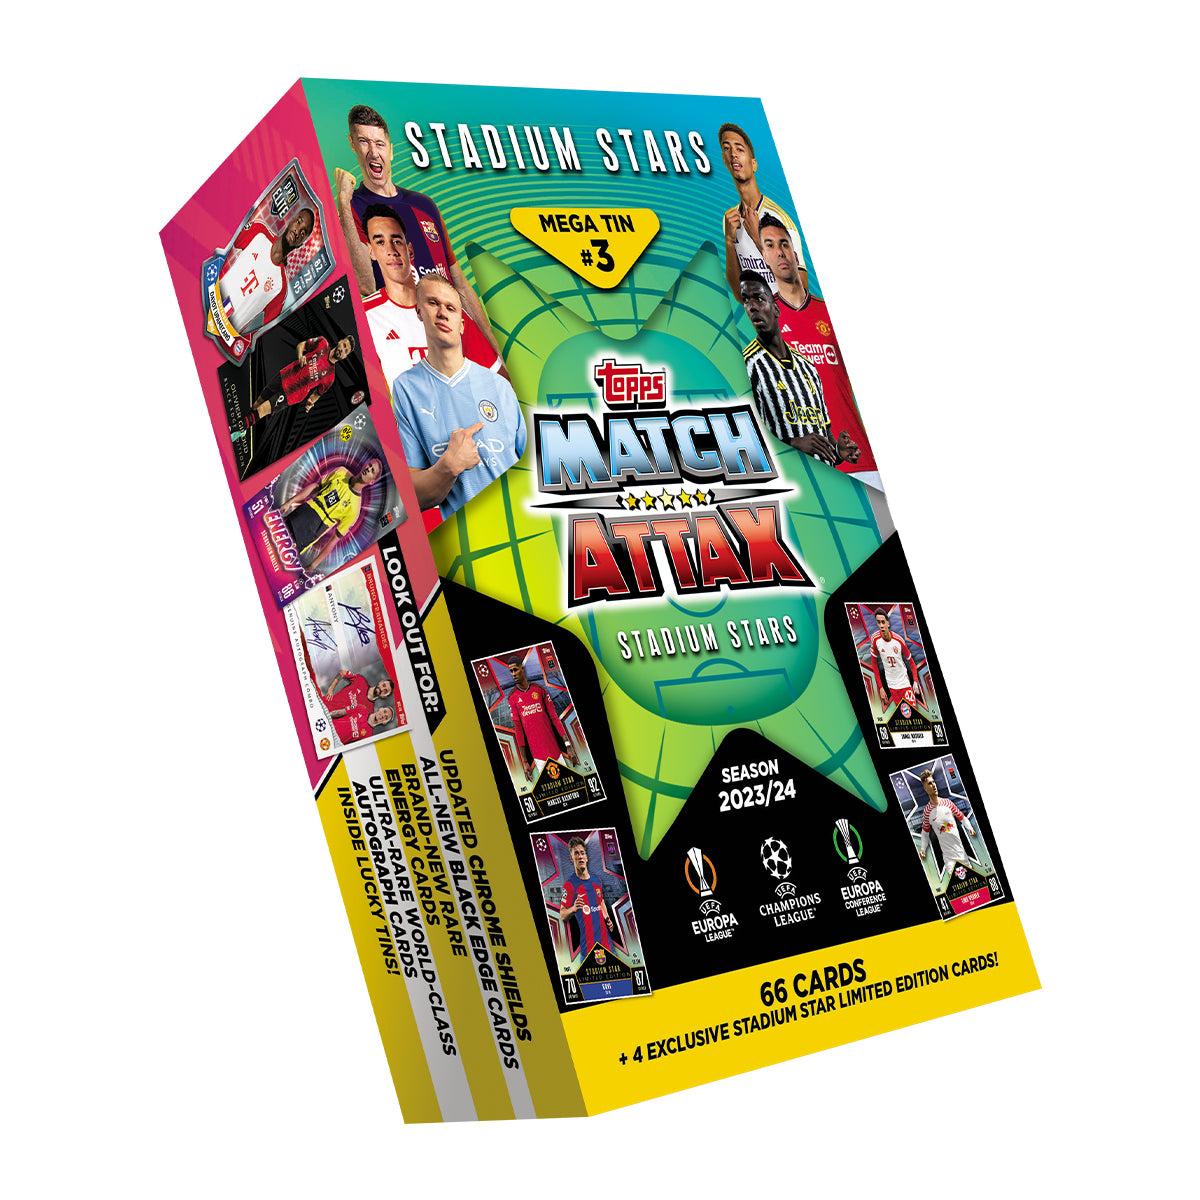 2023-24 TOPPS MATCH ATTAX UEFA CHAMPIONS LEAGUE CARDS - STADIUM STARS MEGA TIN (66 CARDS + 4 LE) (IN STOCK OCT 21)